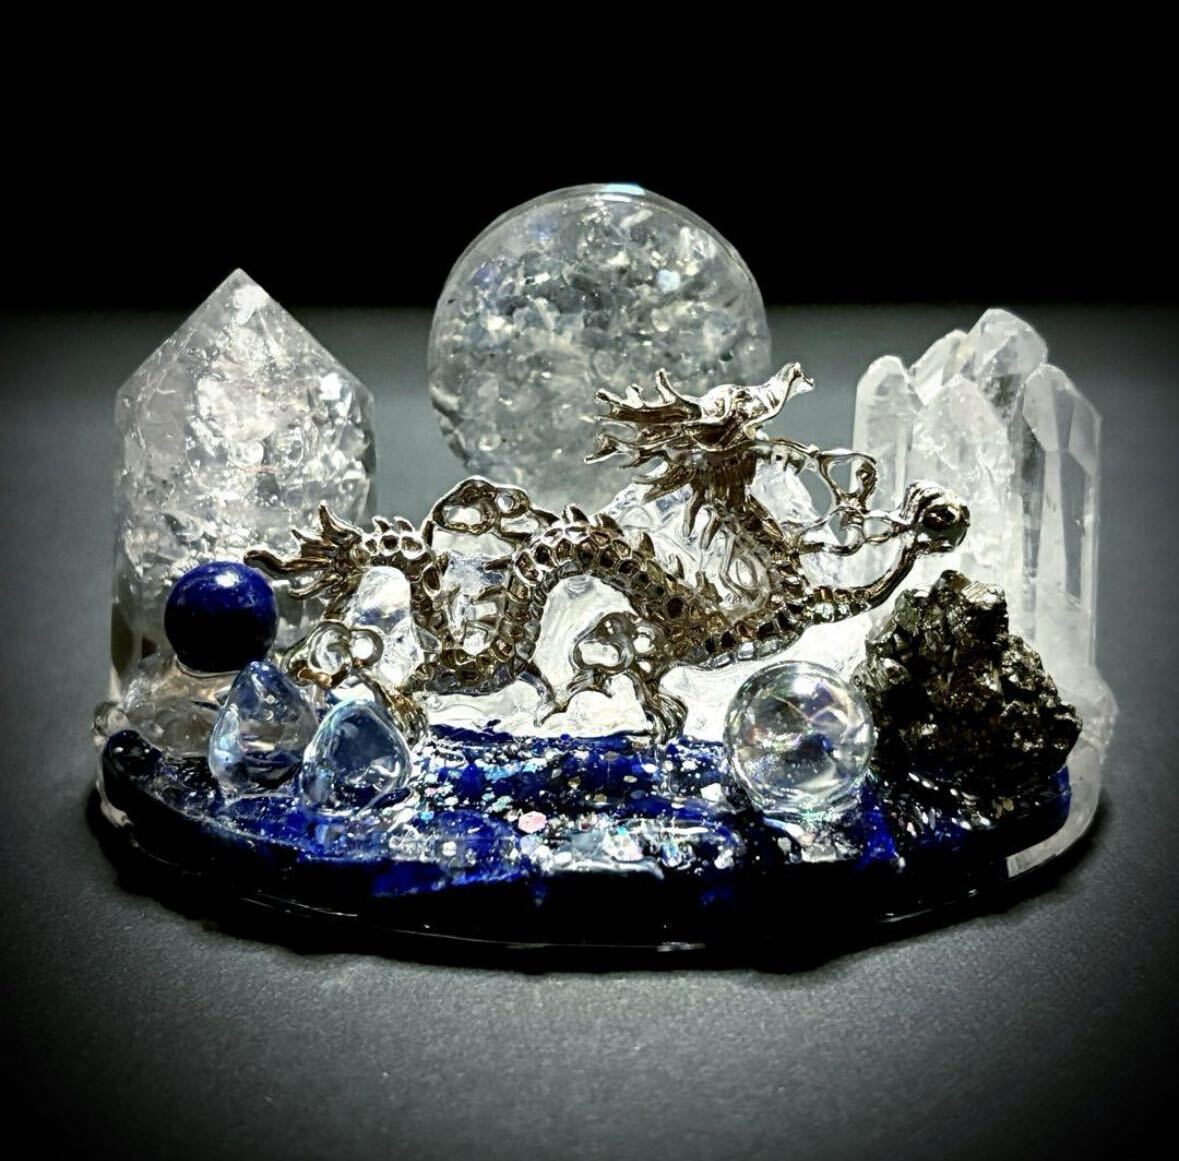 ◇A mysterious night with dancing dragons◇Orgonite◇Lapis lazuli◇Labradorite◇Pyrite◇Crystal◇, Handmade items, interior, miscellaneous goods, ornament, object